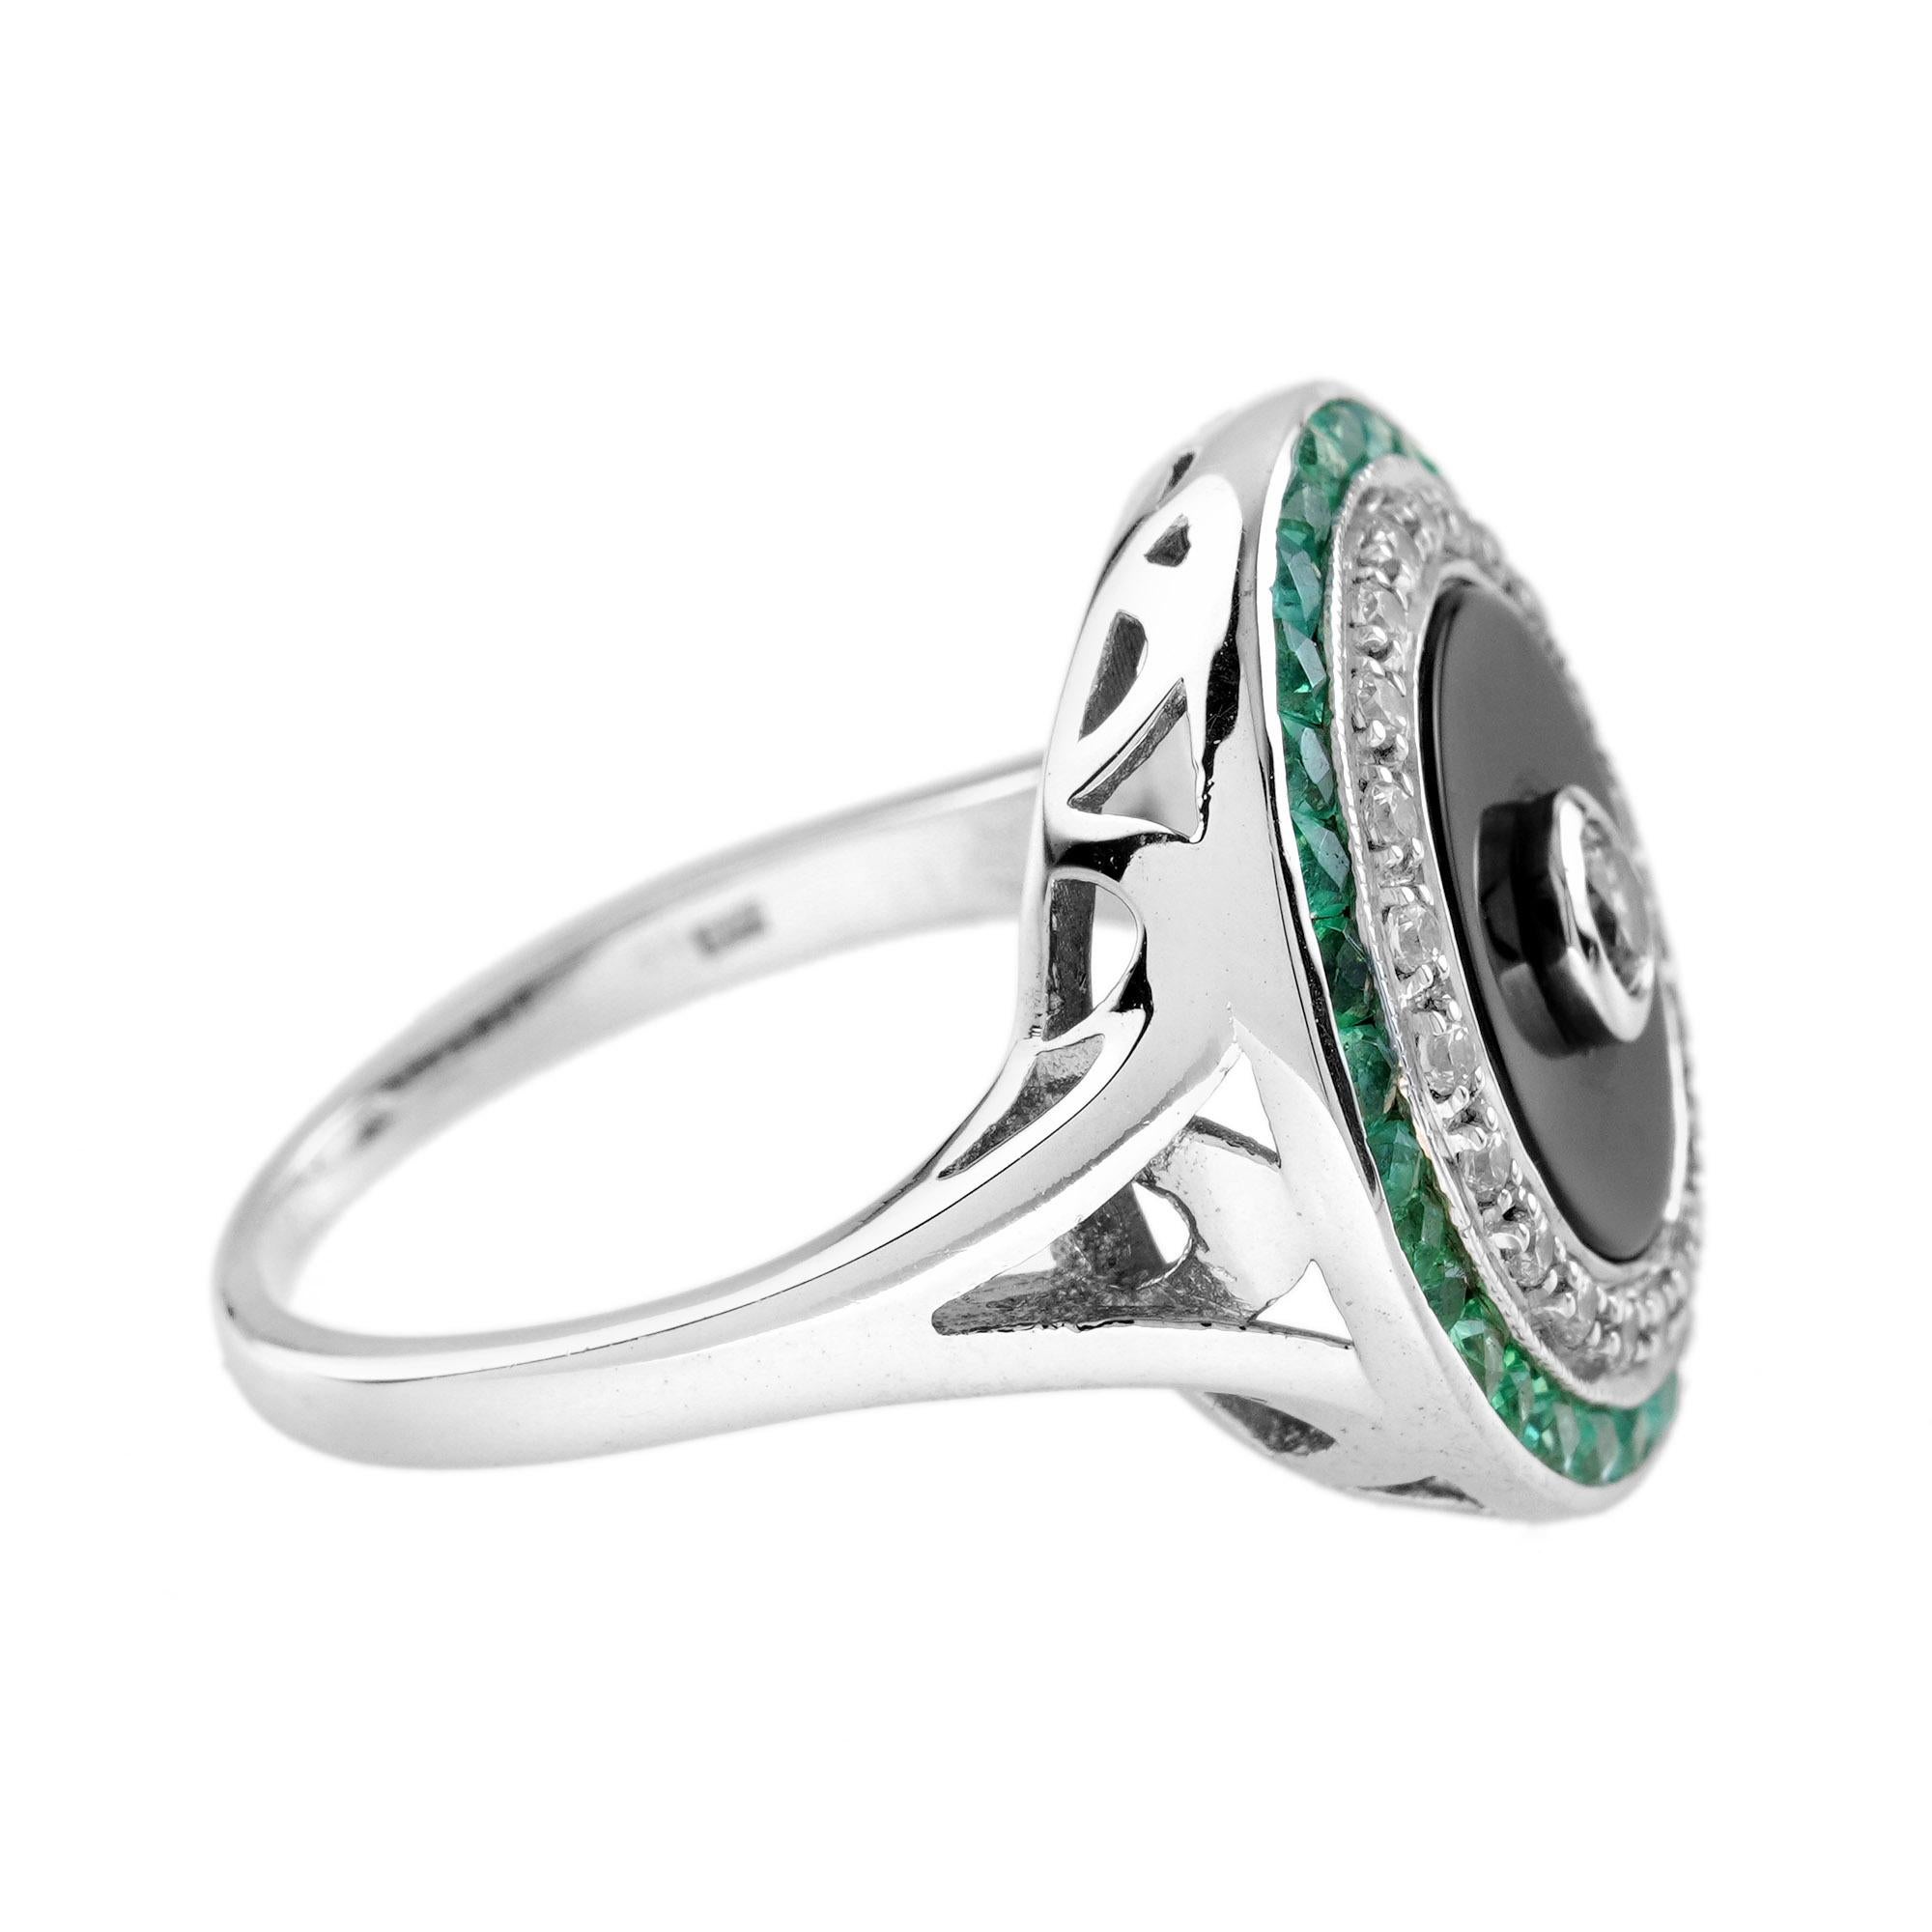 For Sale:  Diamond Onyx Emerald Art Deco Style Target Cocktail Ring in 14K White Gold 4